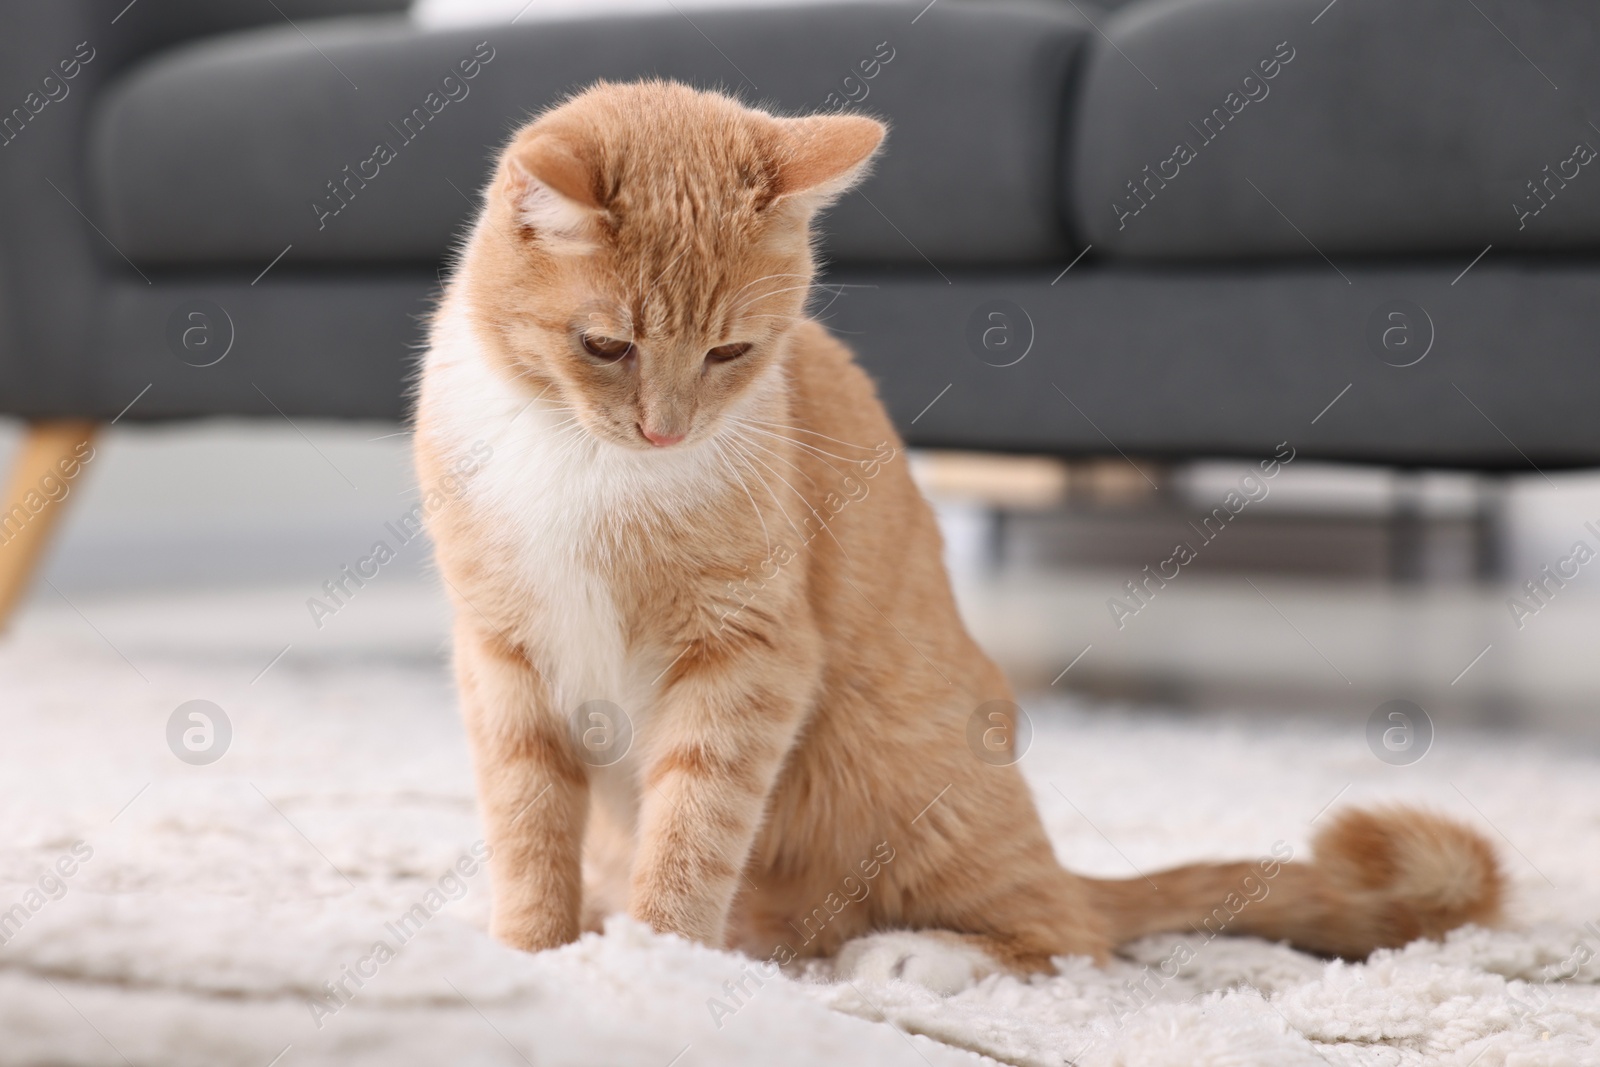 Photo of Cute ginger cat sitting on floor at home